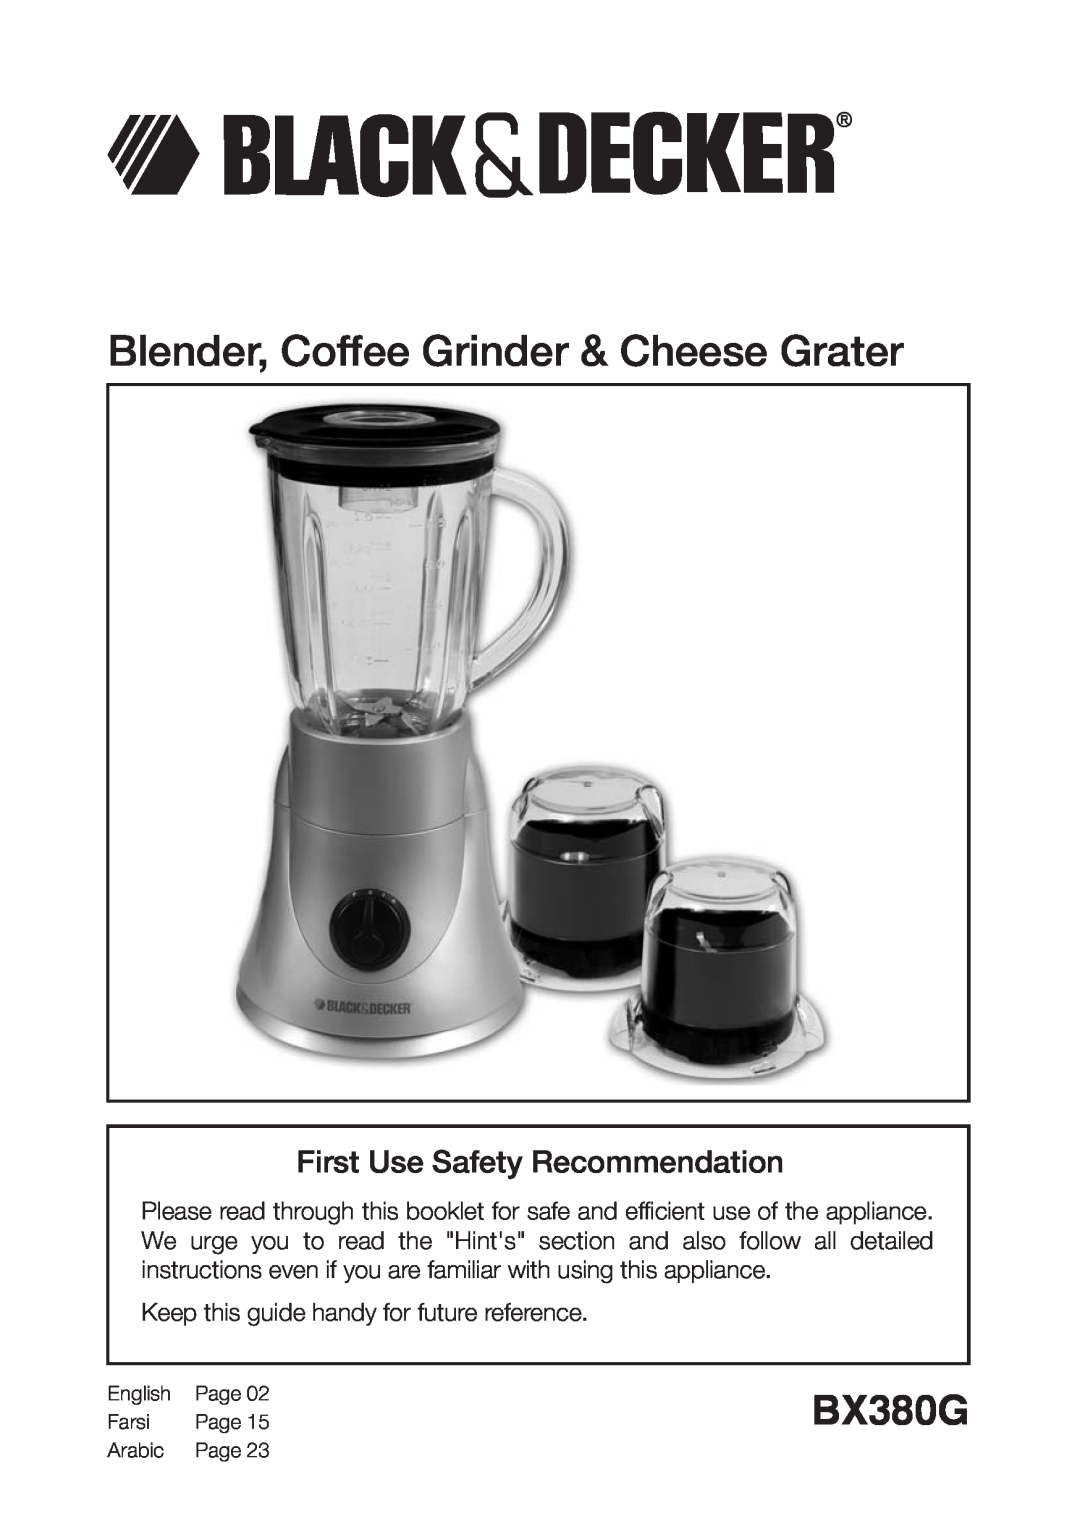 Black & Decker BX380G manual Blender, Coffee Grinder & Cheese Grater, First Use Safety Recommendation 